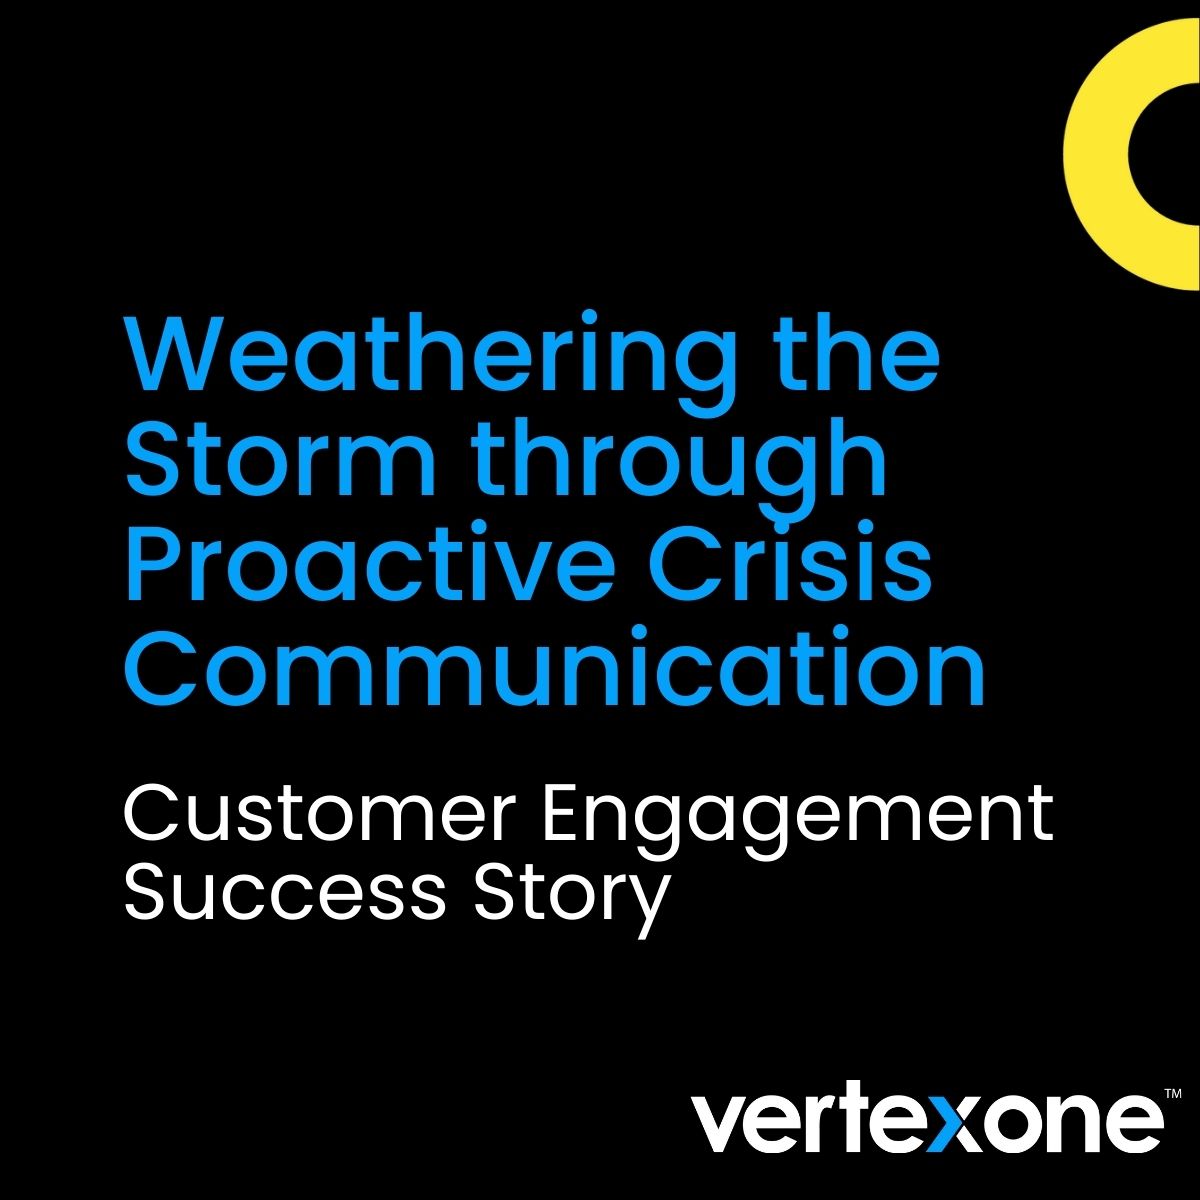 Weathering the Storm through Crisis Communications